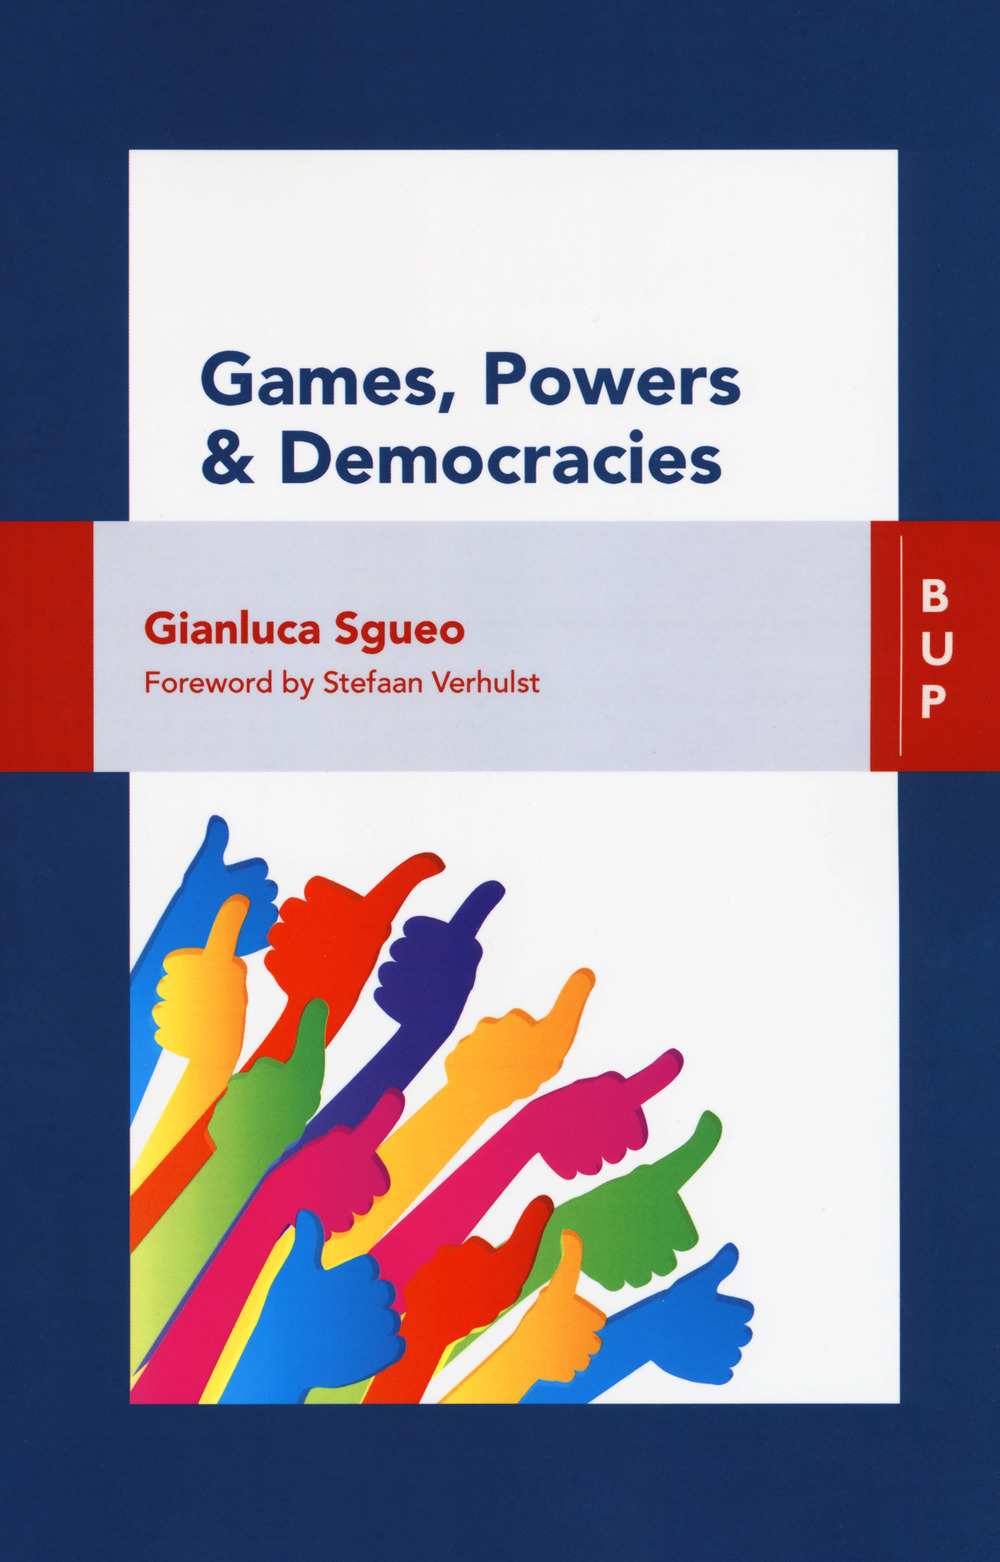 Games, powers and democracies